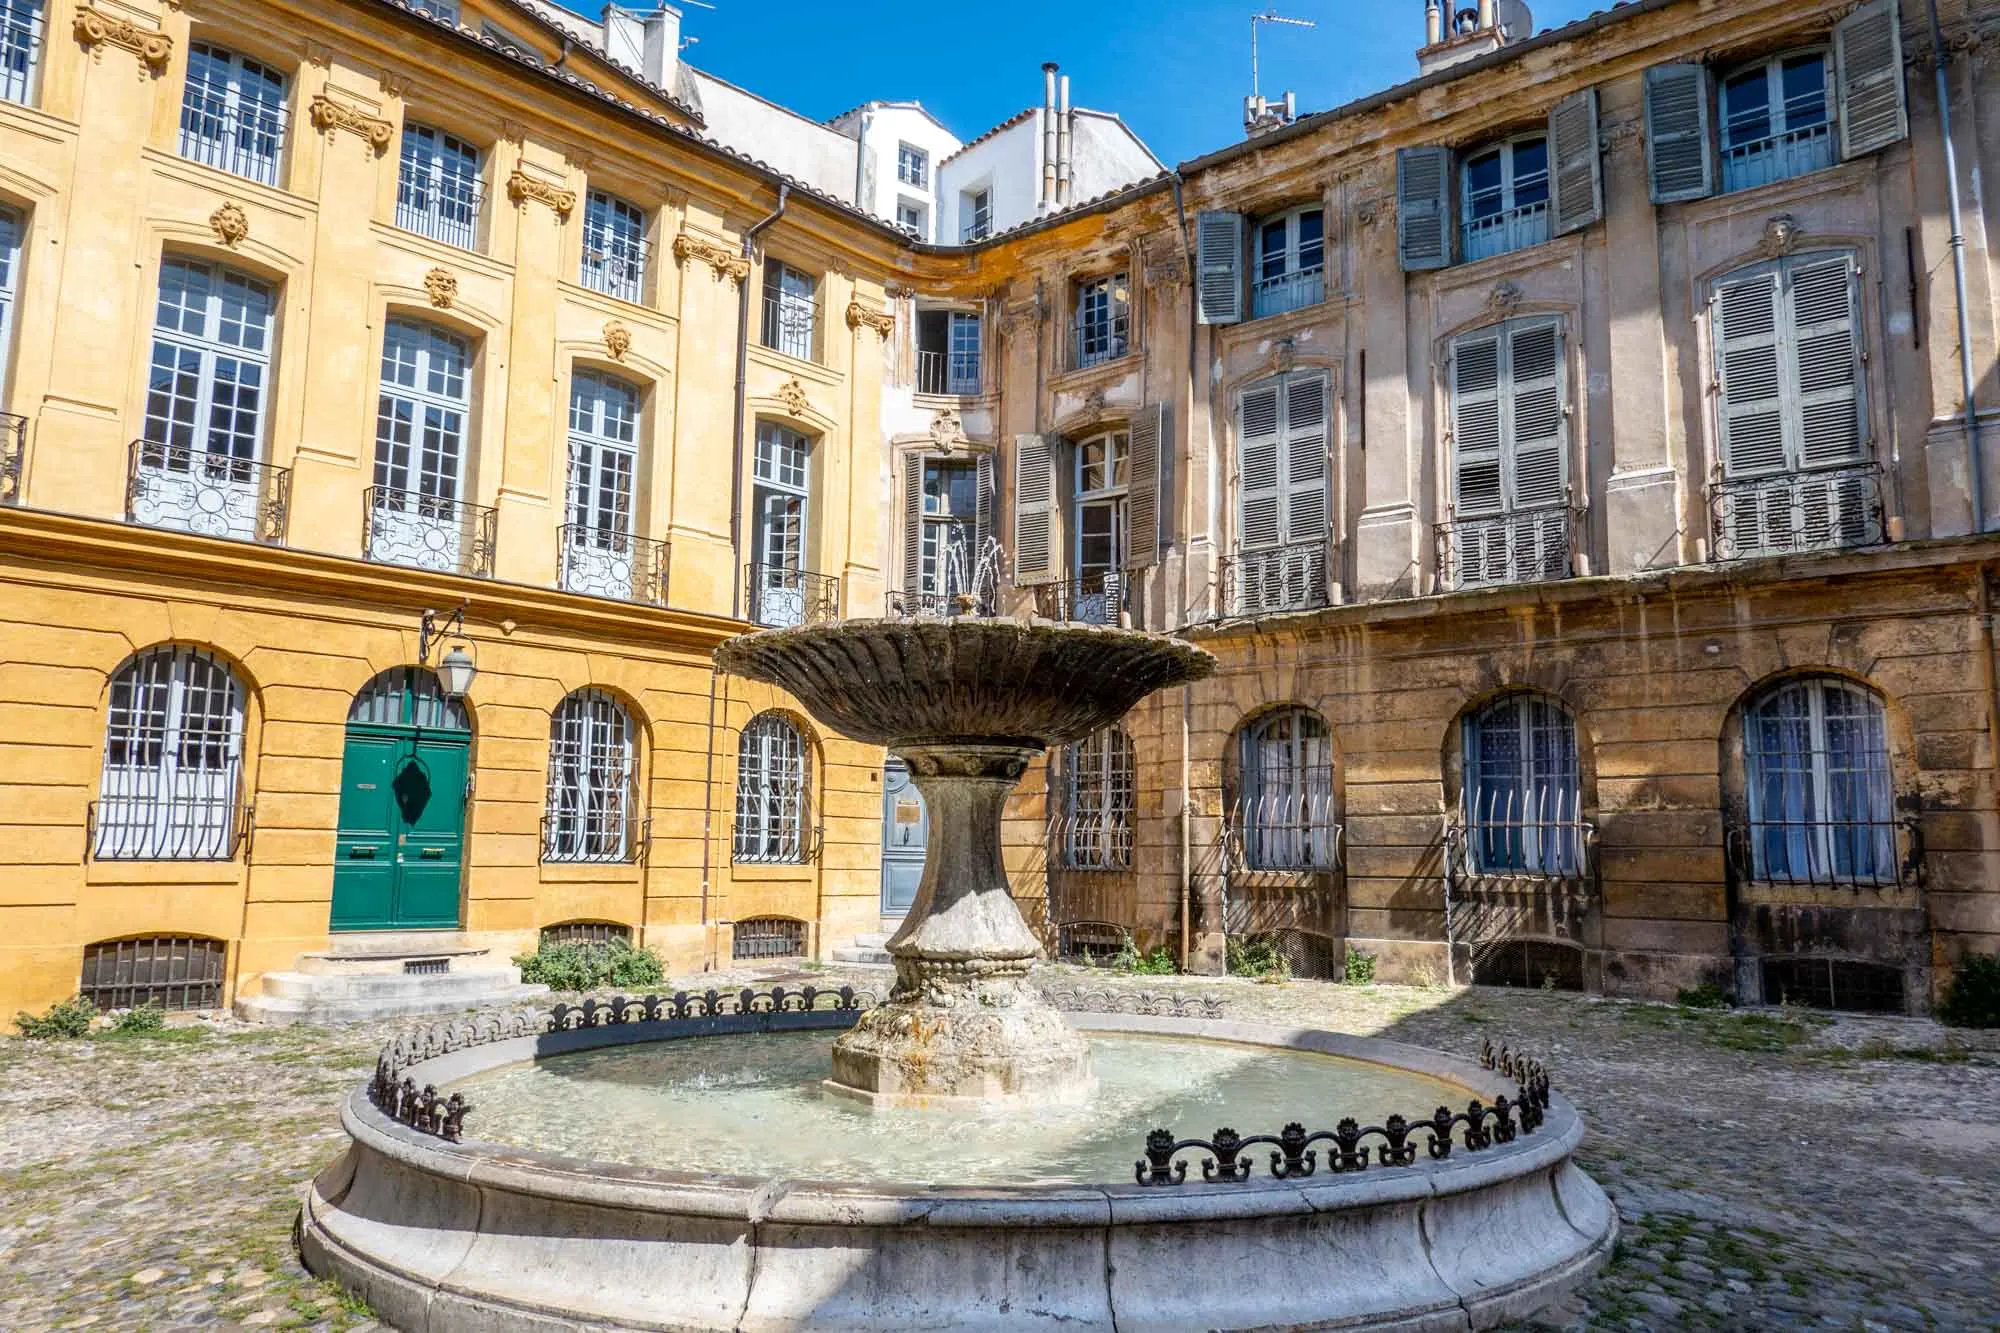 Fountain in a square surrounded by yellow buildings with wrought iron window decorations.